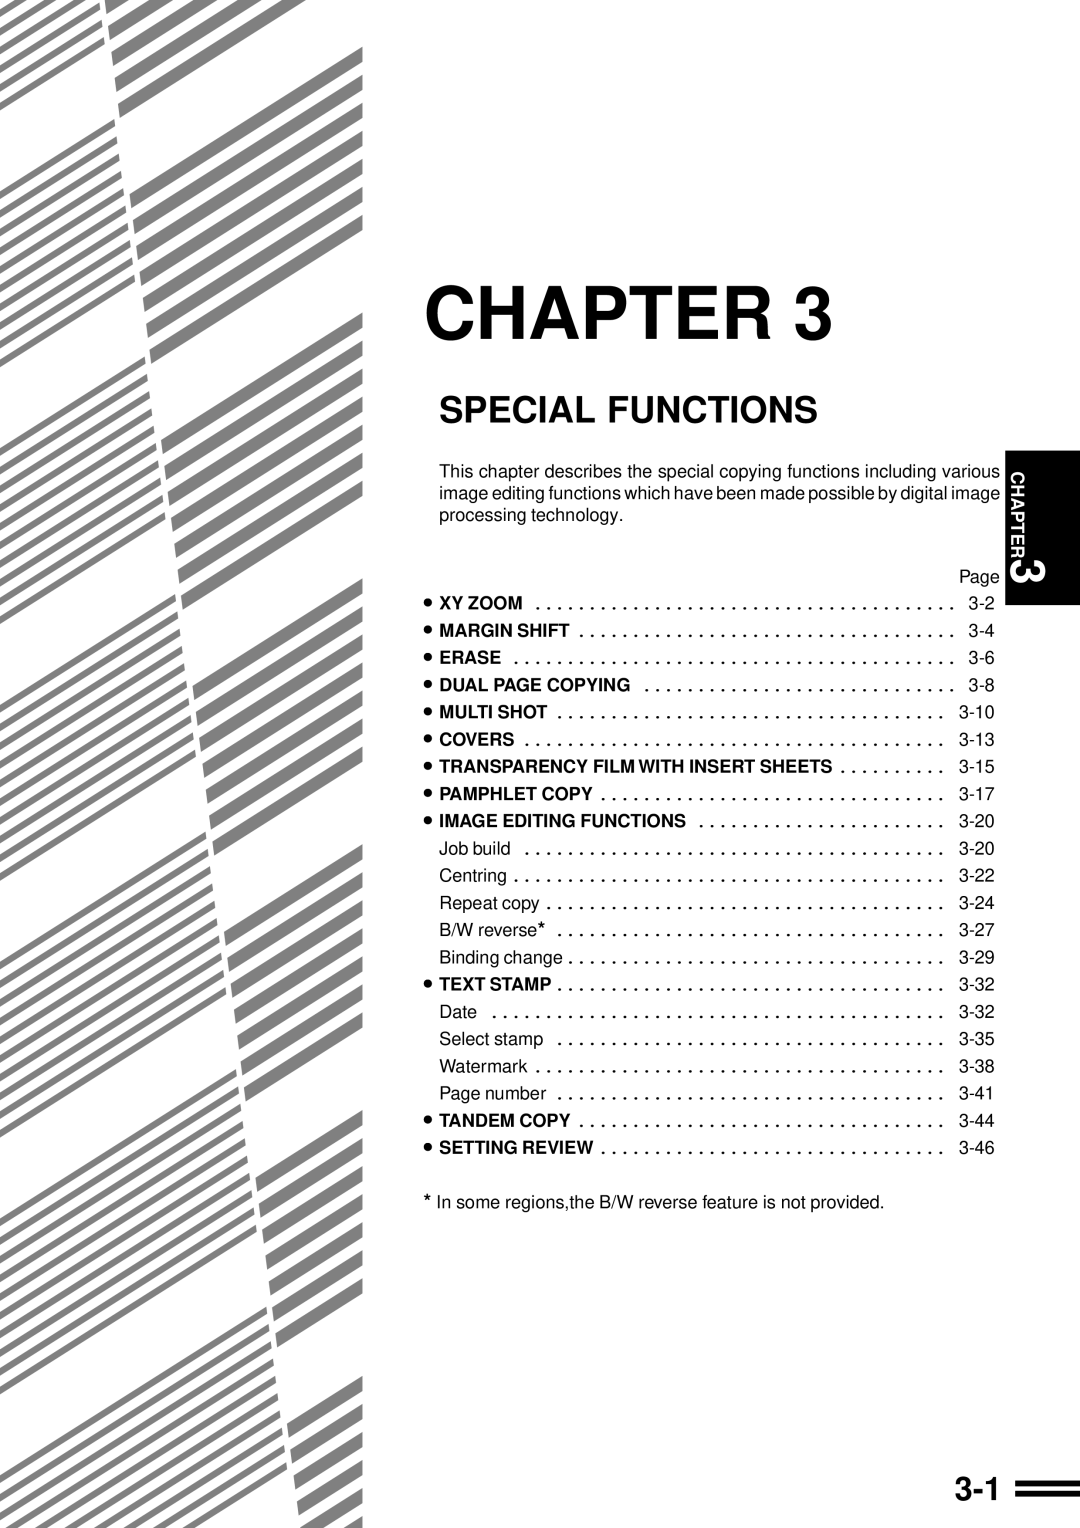 Sharp AR-507 Special Functions, Chapter, Xy Zoom, Margin Shift, Erase, Dual Page Copying, Multi Shot, Covers, Repeat copy 